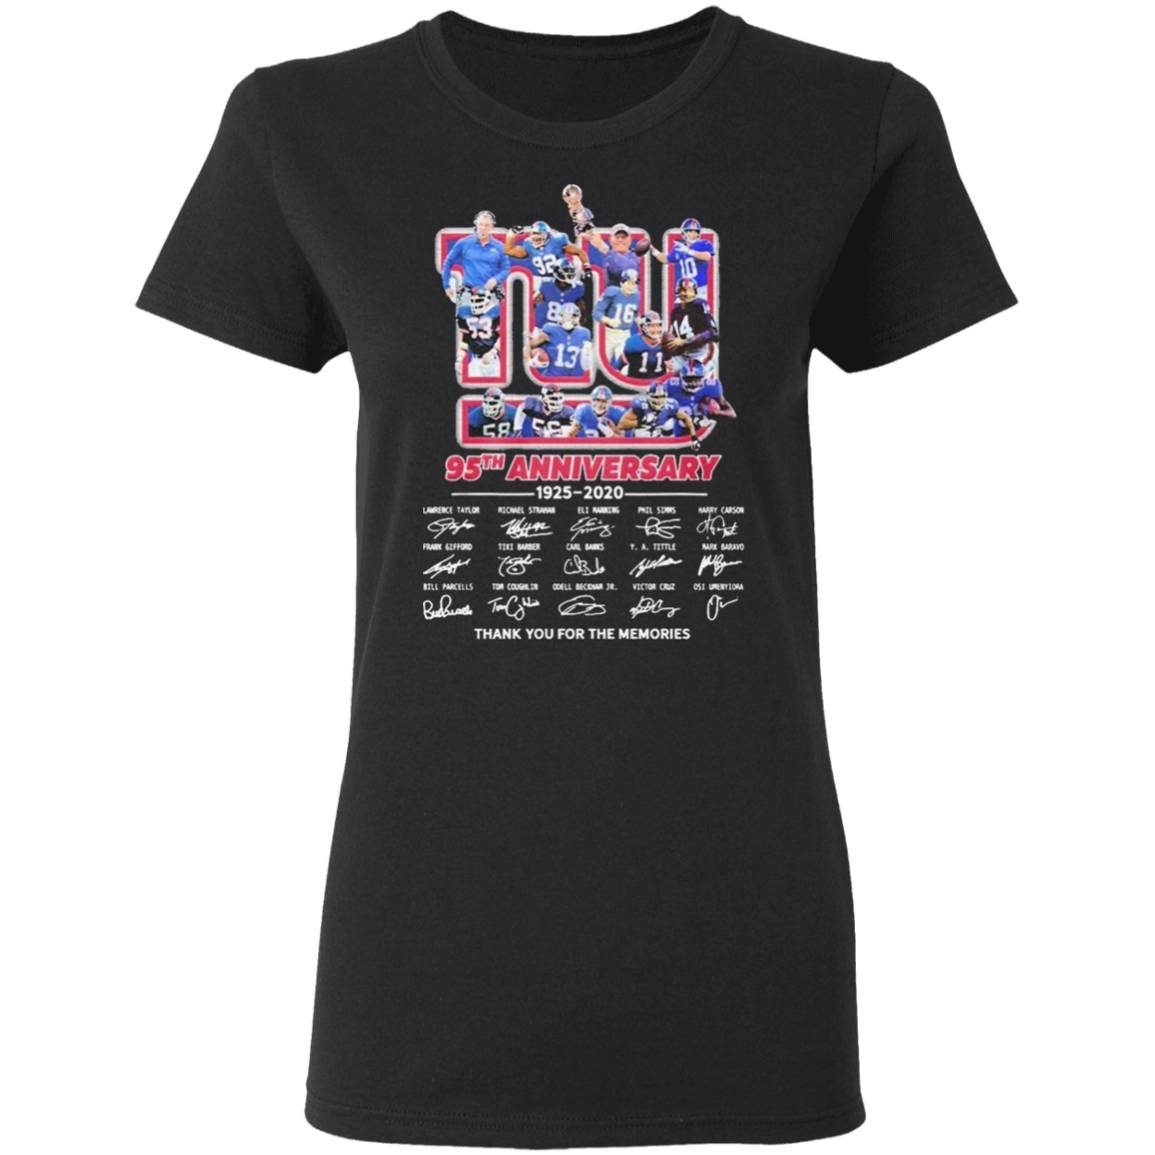 Official New York Giants 95th anniversary 1925 2020 thank you for the memories signatures 3